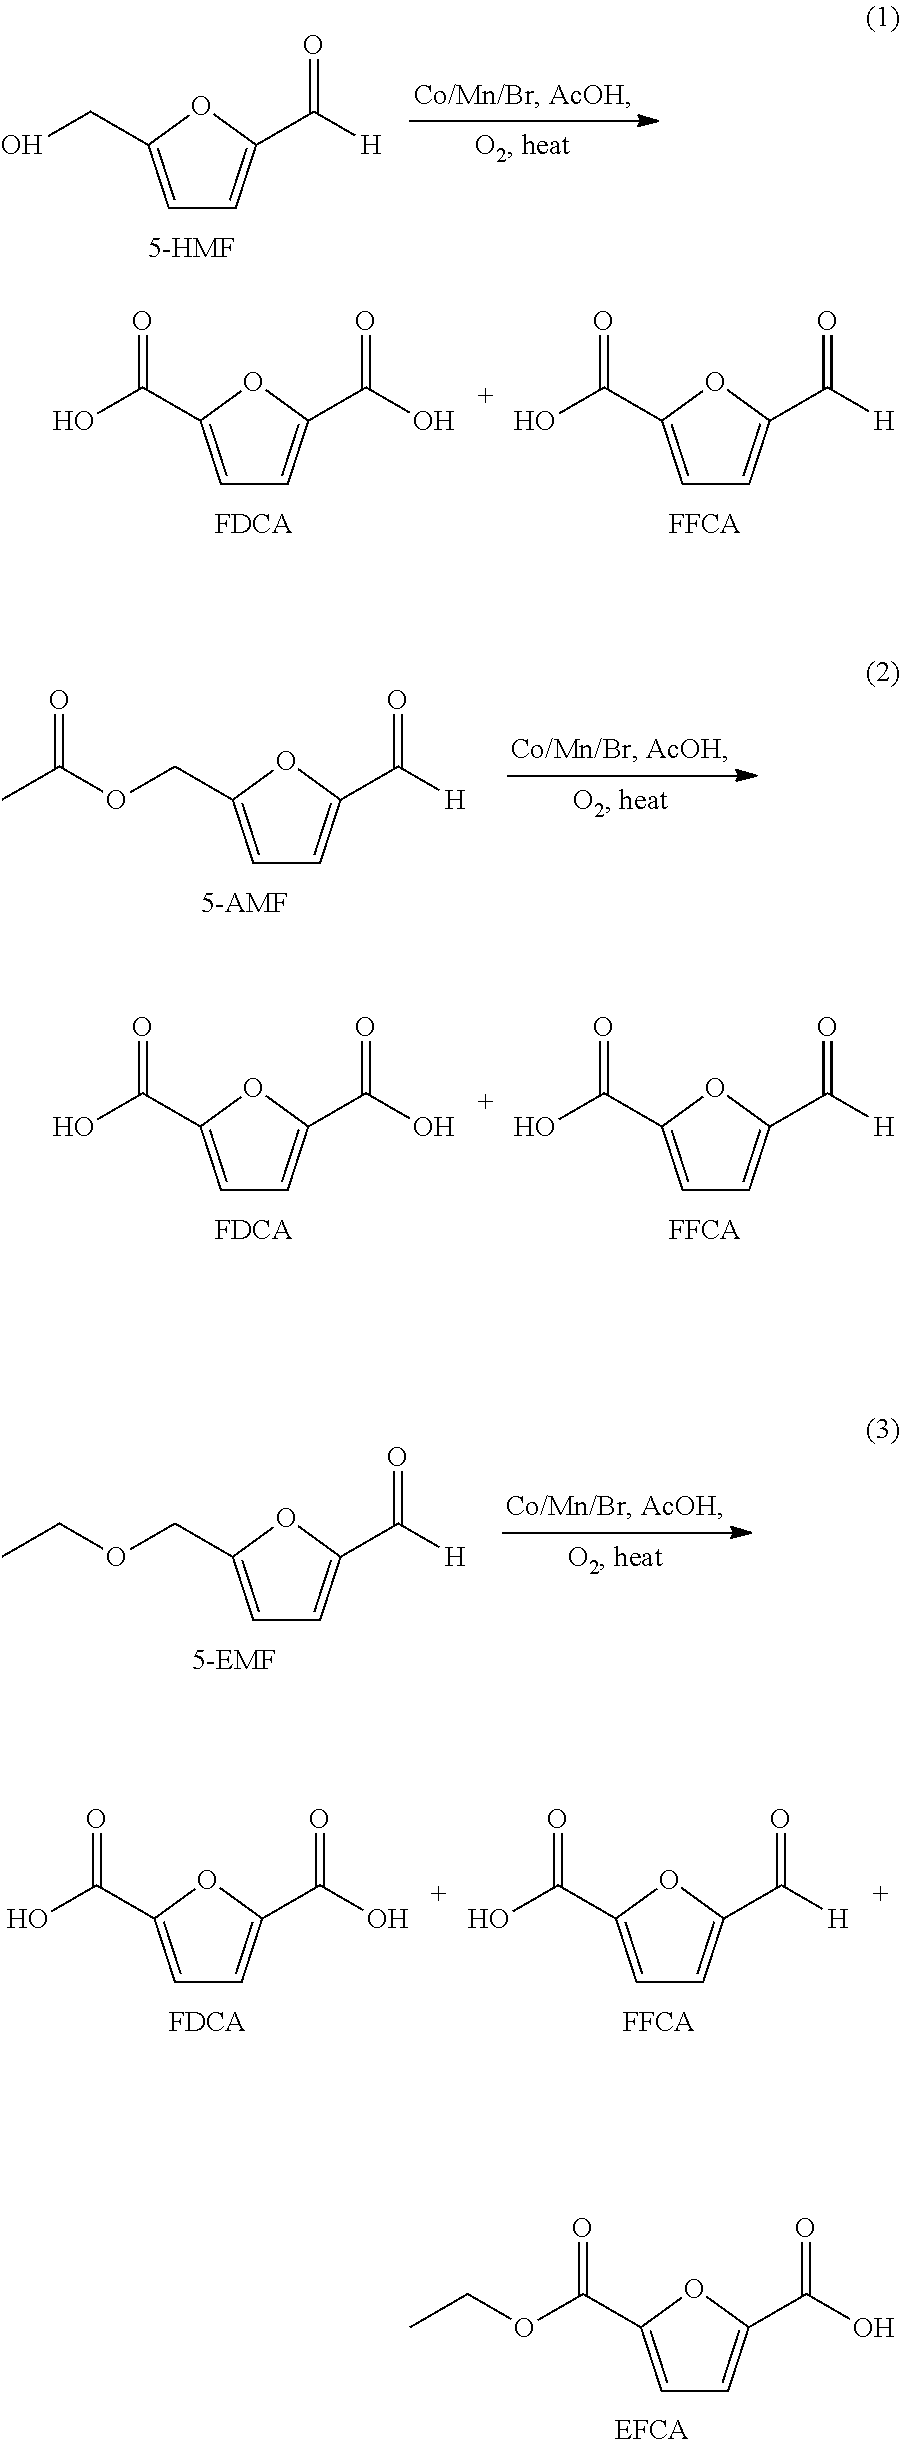 Oxidation process to produce a crude dry carboxylic acid product